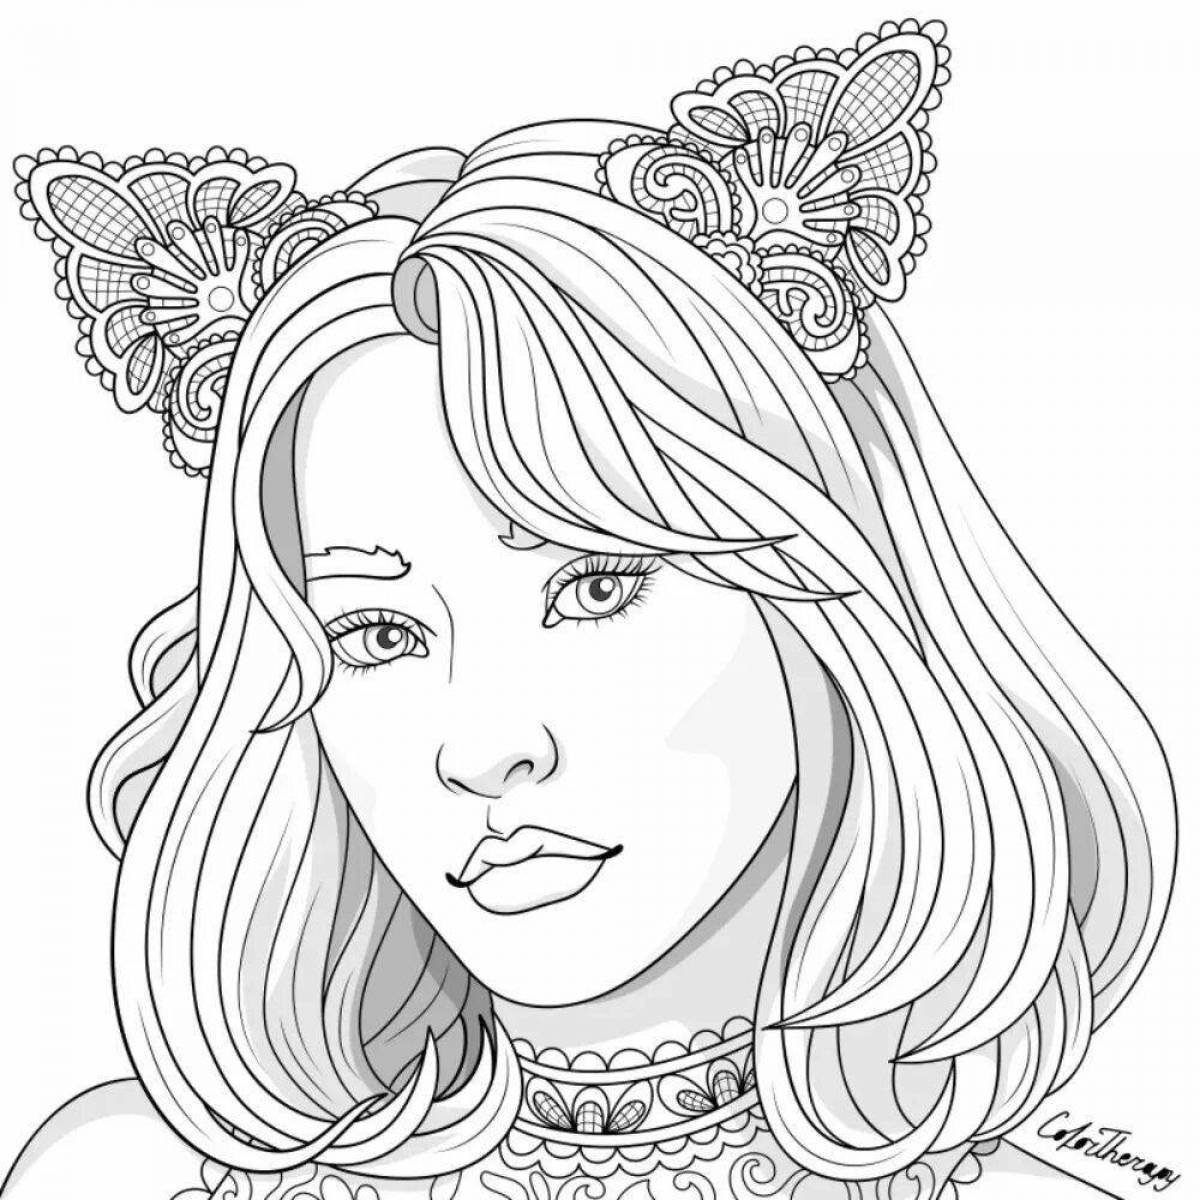 Miss nicole coloring page